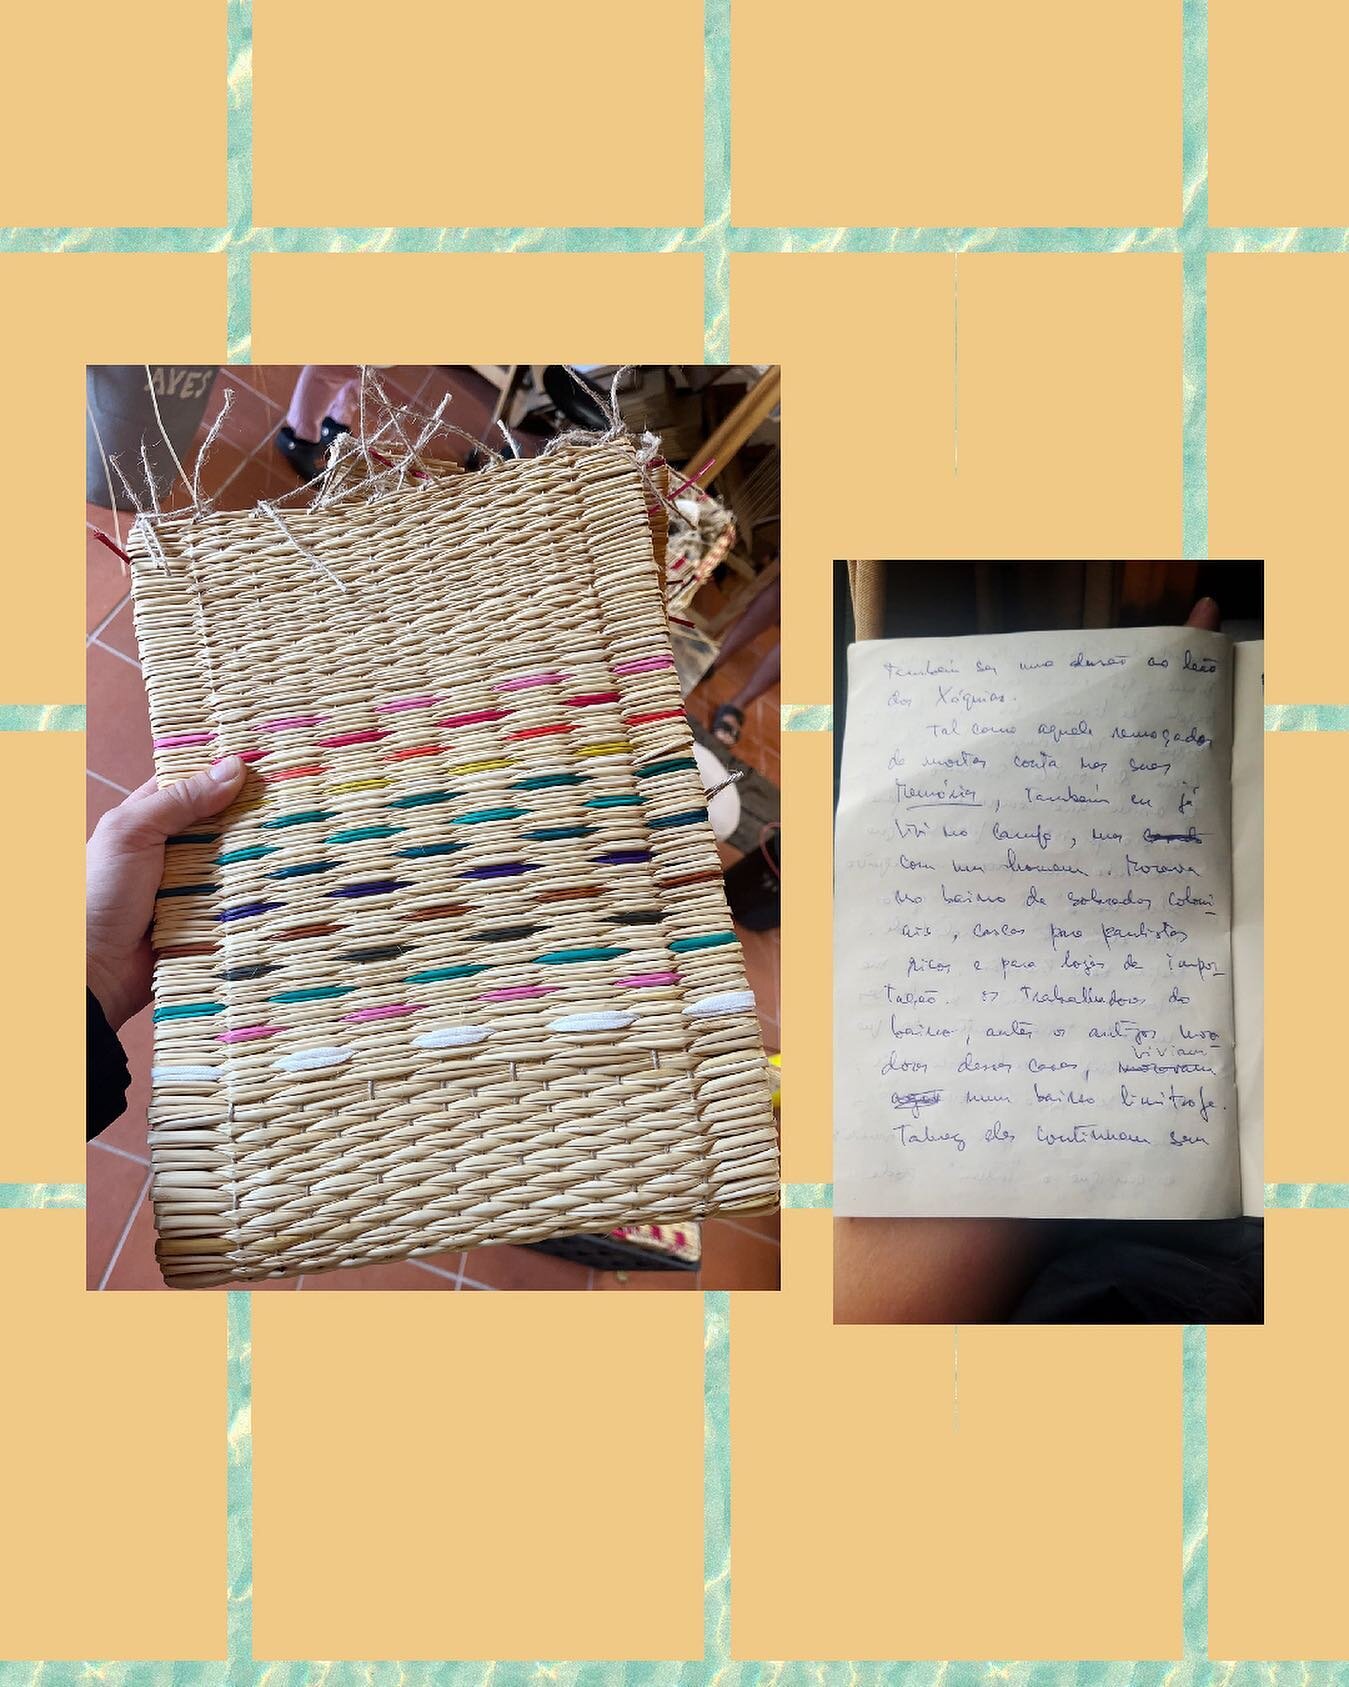 A woven mat from our workshop and a handwritten text from Malacca.

This year we invited Duarte Braga to write on tradition and LGBTQ+ values. 

You can read his take at: toinoabel.com/pride

✊🏻🏳️&zwj;🌈
#pride